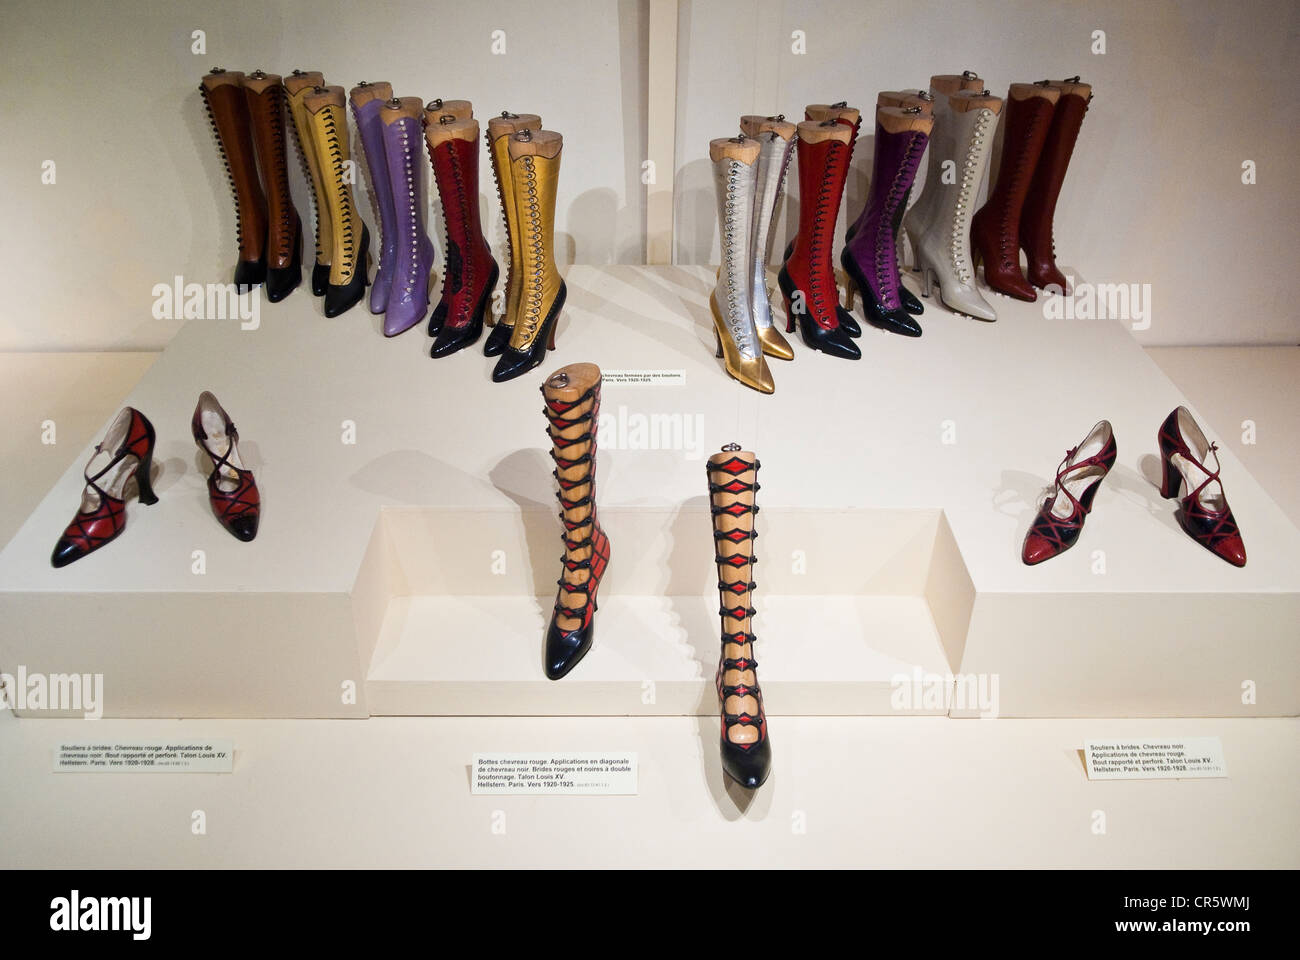 France, Drome, Romans sur Isere, inside the Musee International de Chaussure (International Museum of shoes), compulsory mention Stock Photo